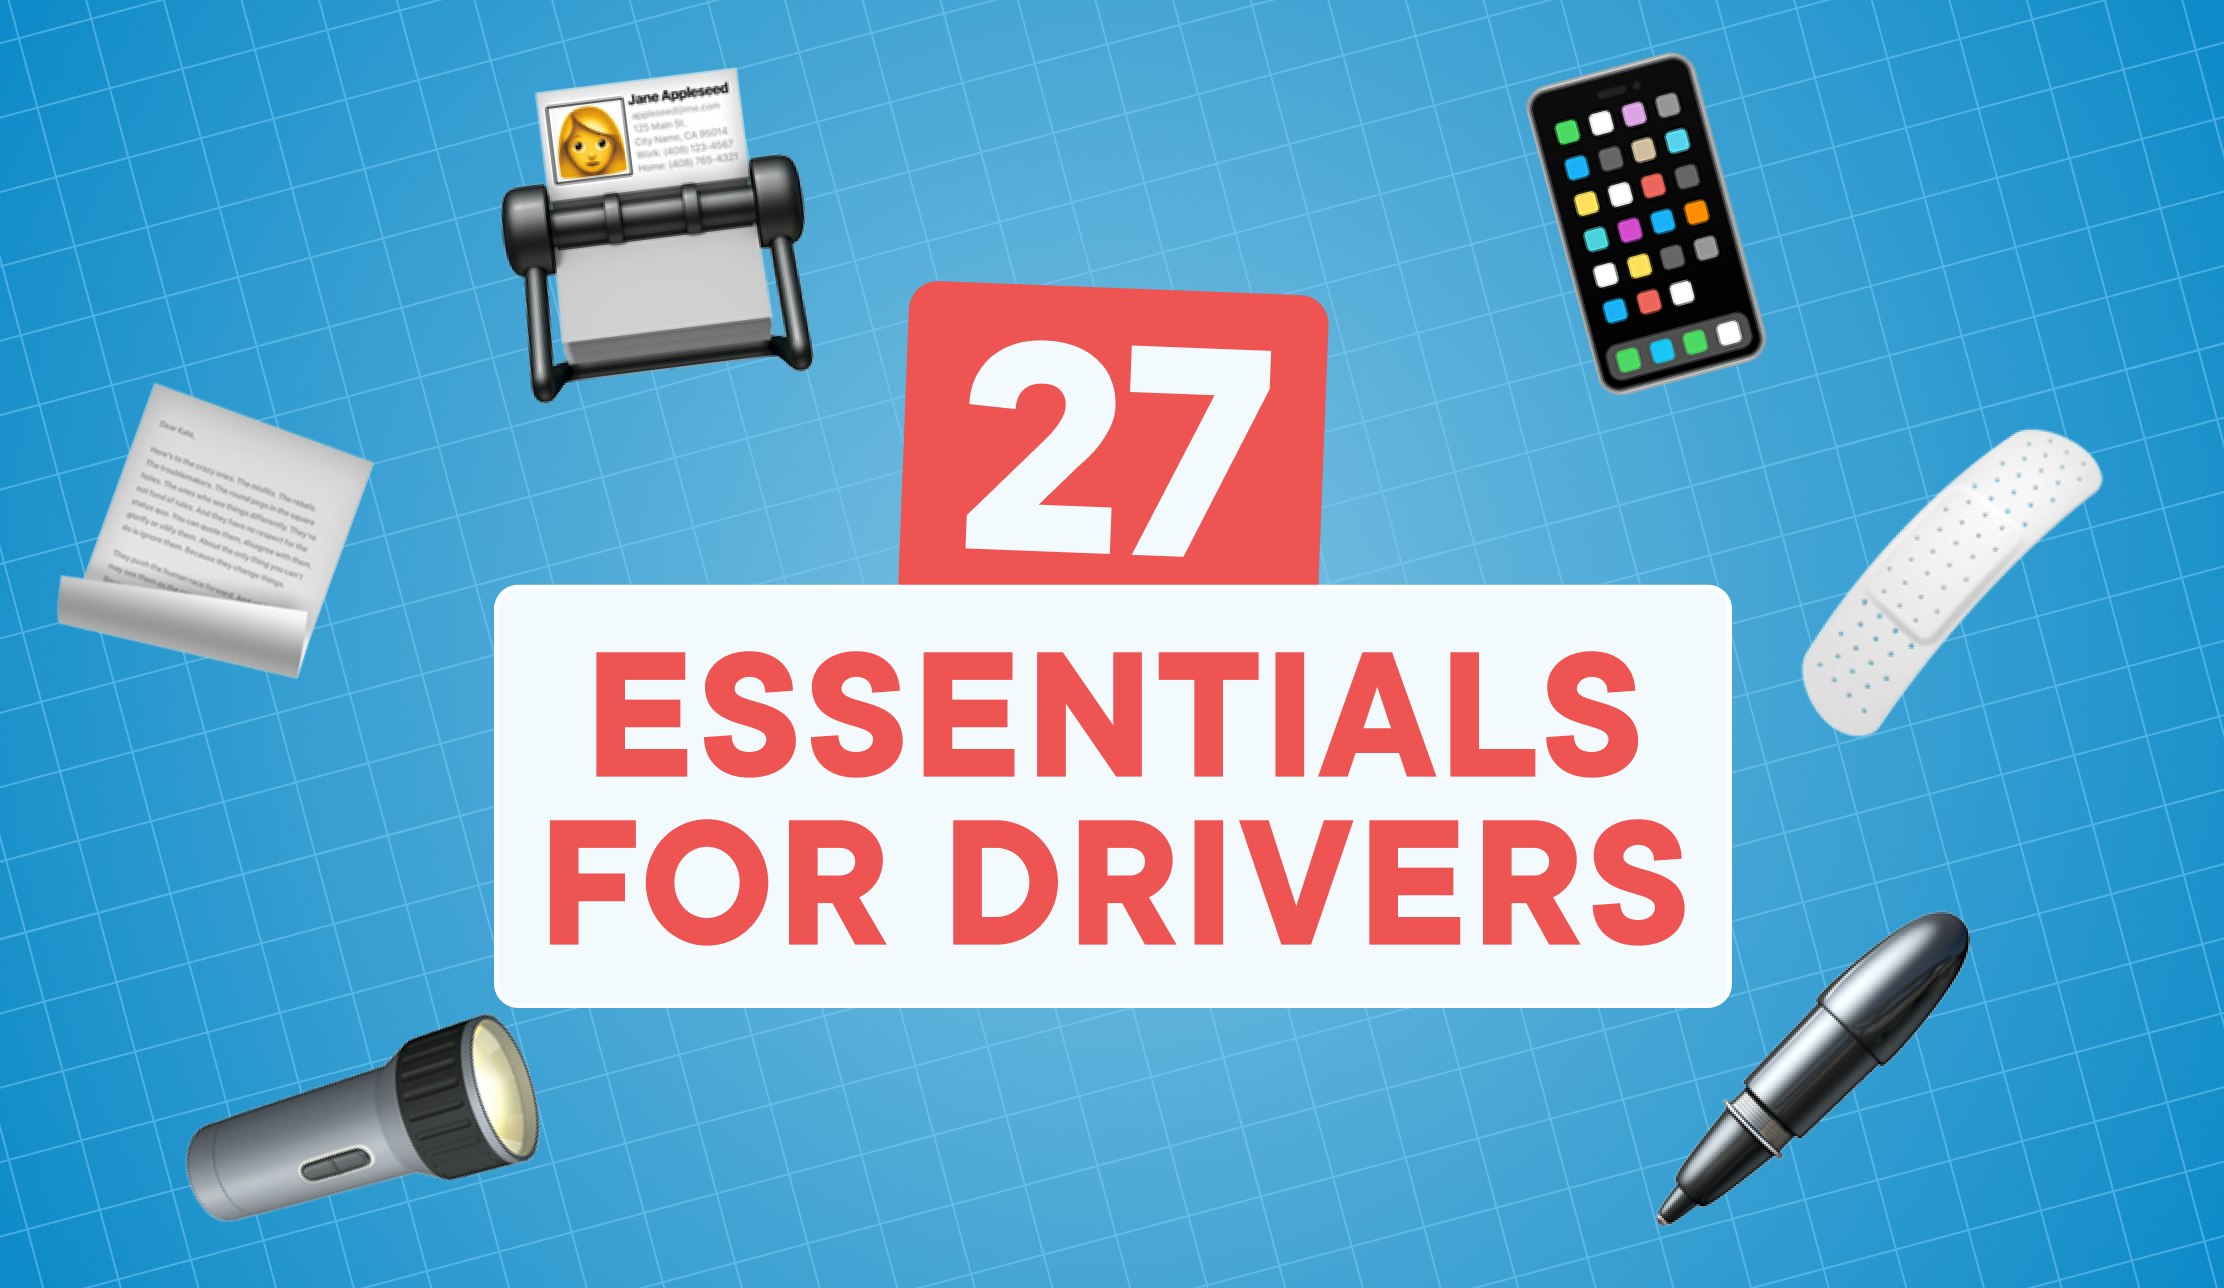 Ask The Expert: Every Courier Driver Needs These 27 Essentials